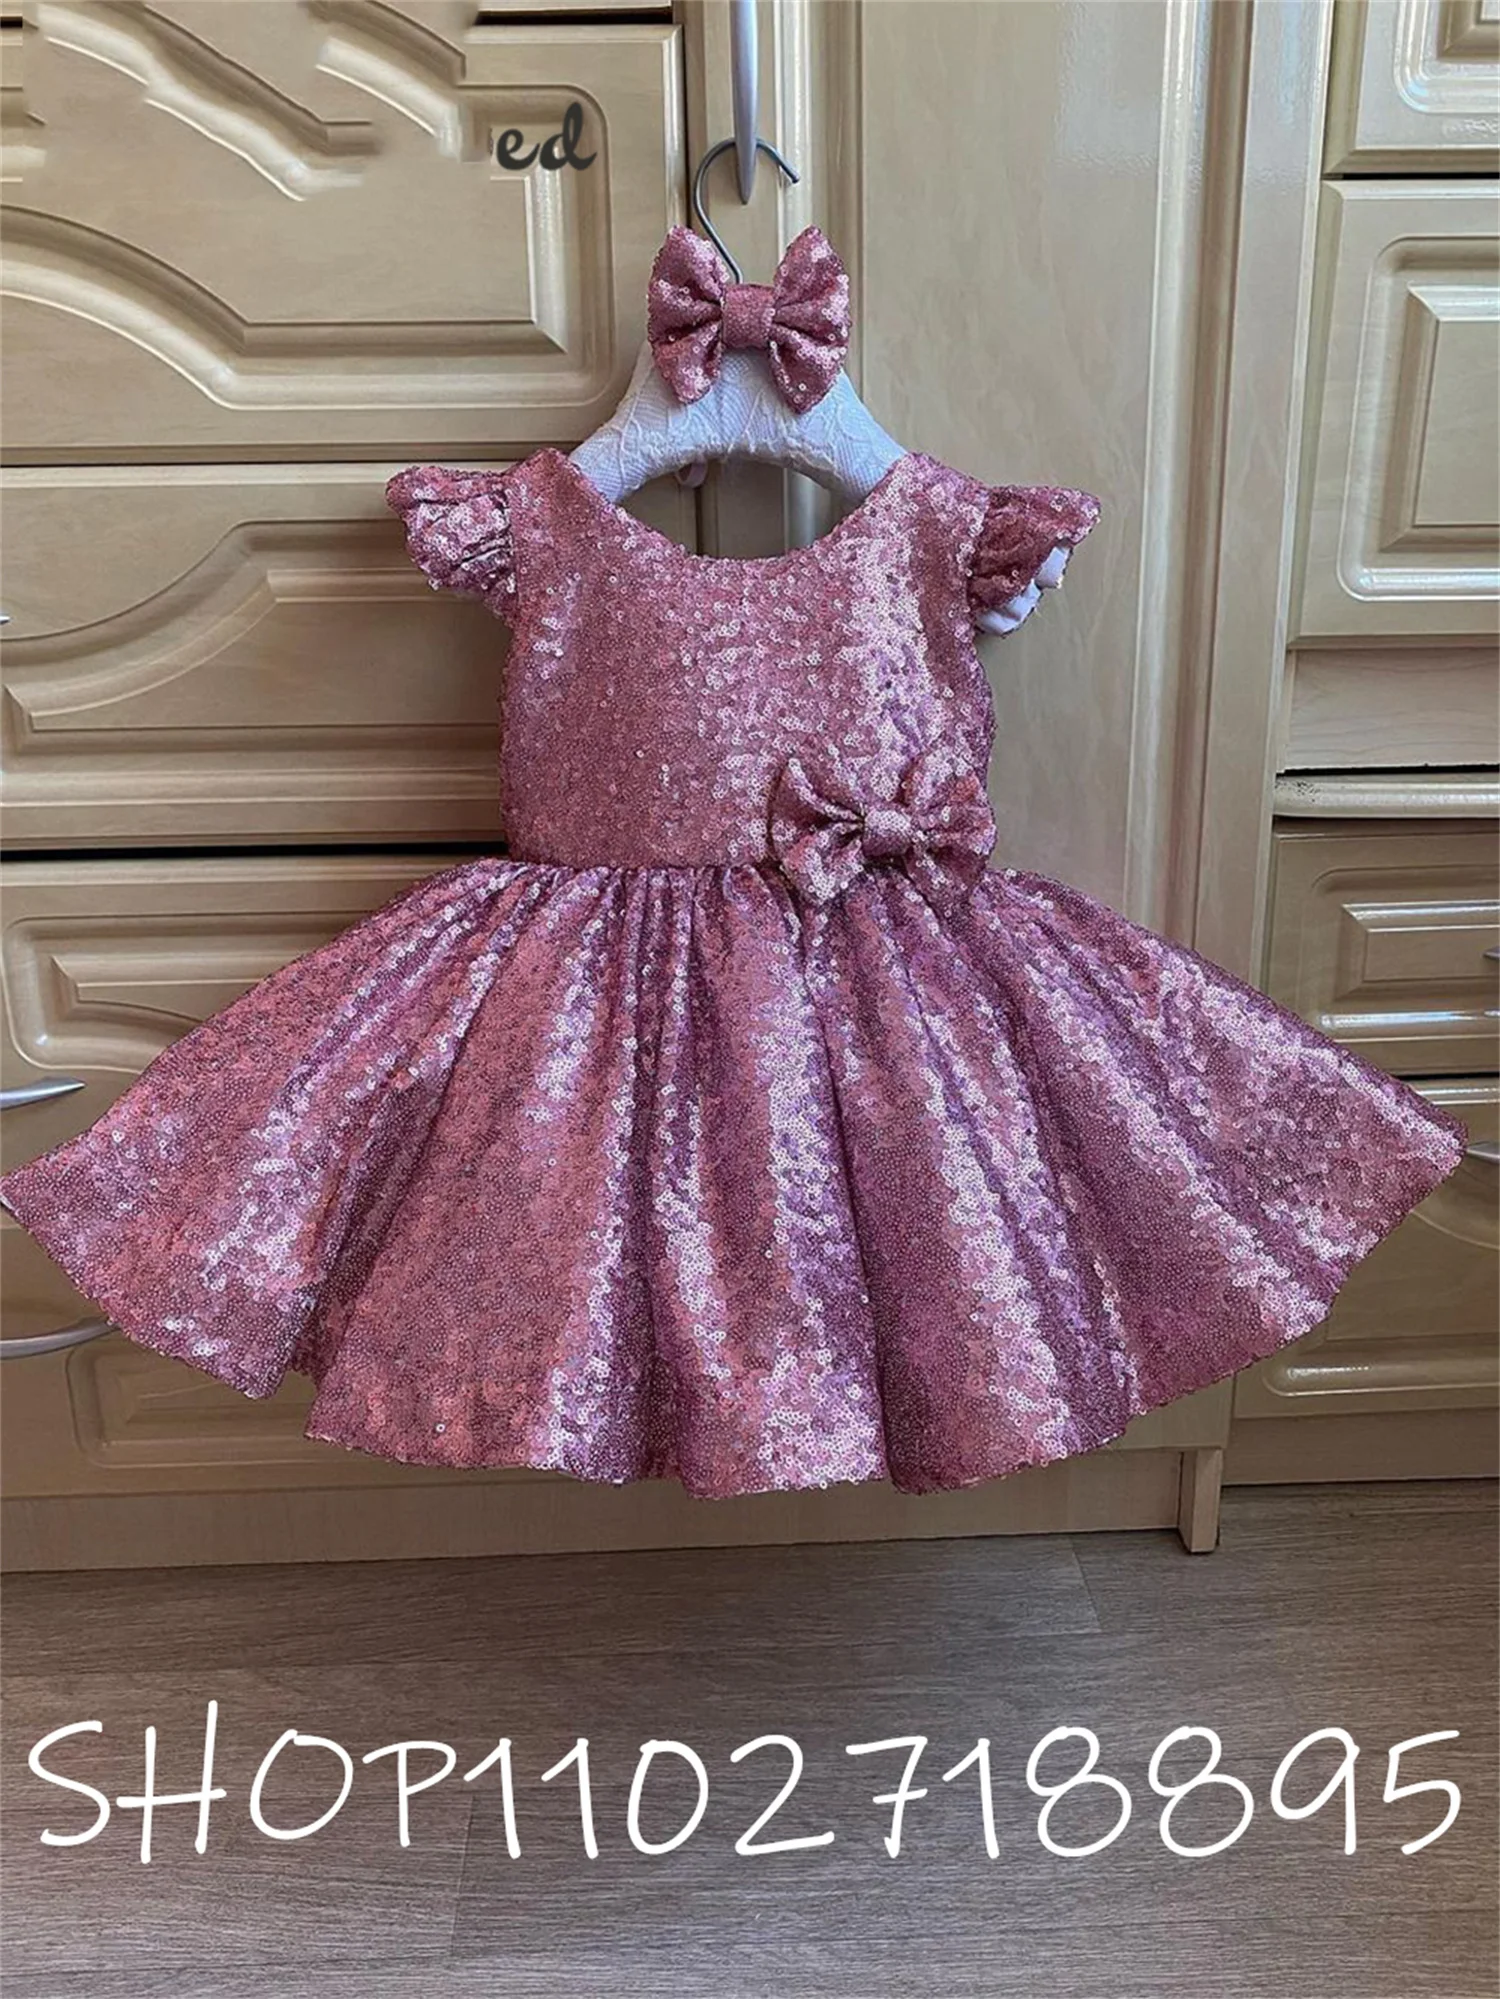 

Glitter Ball Gown Girl Party Dresses Illusion Sleeves Puffy Layers Girl Birthday Dress Girl Christmas Party robe de princesse